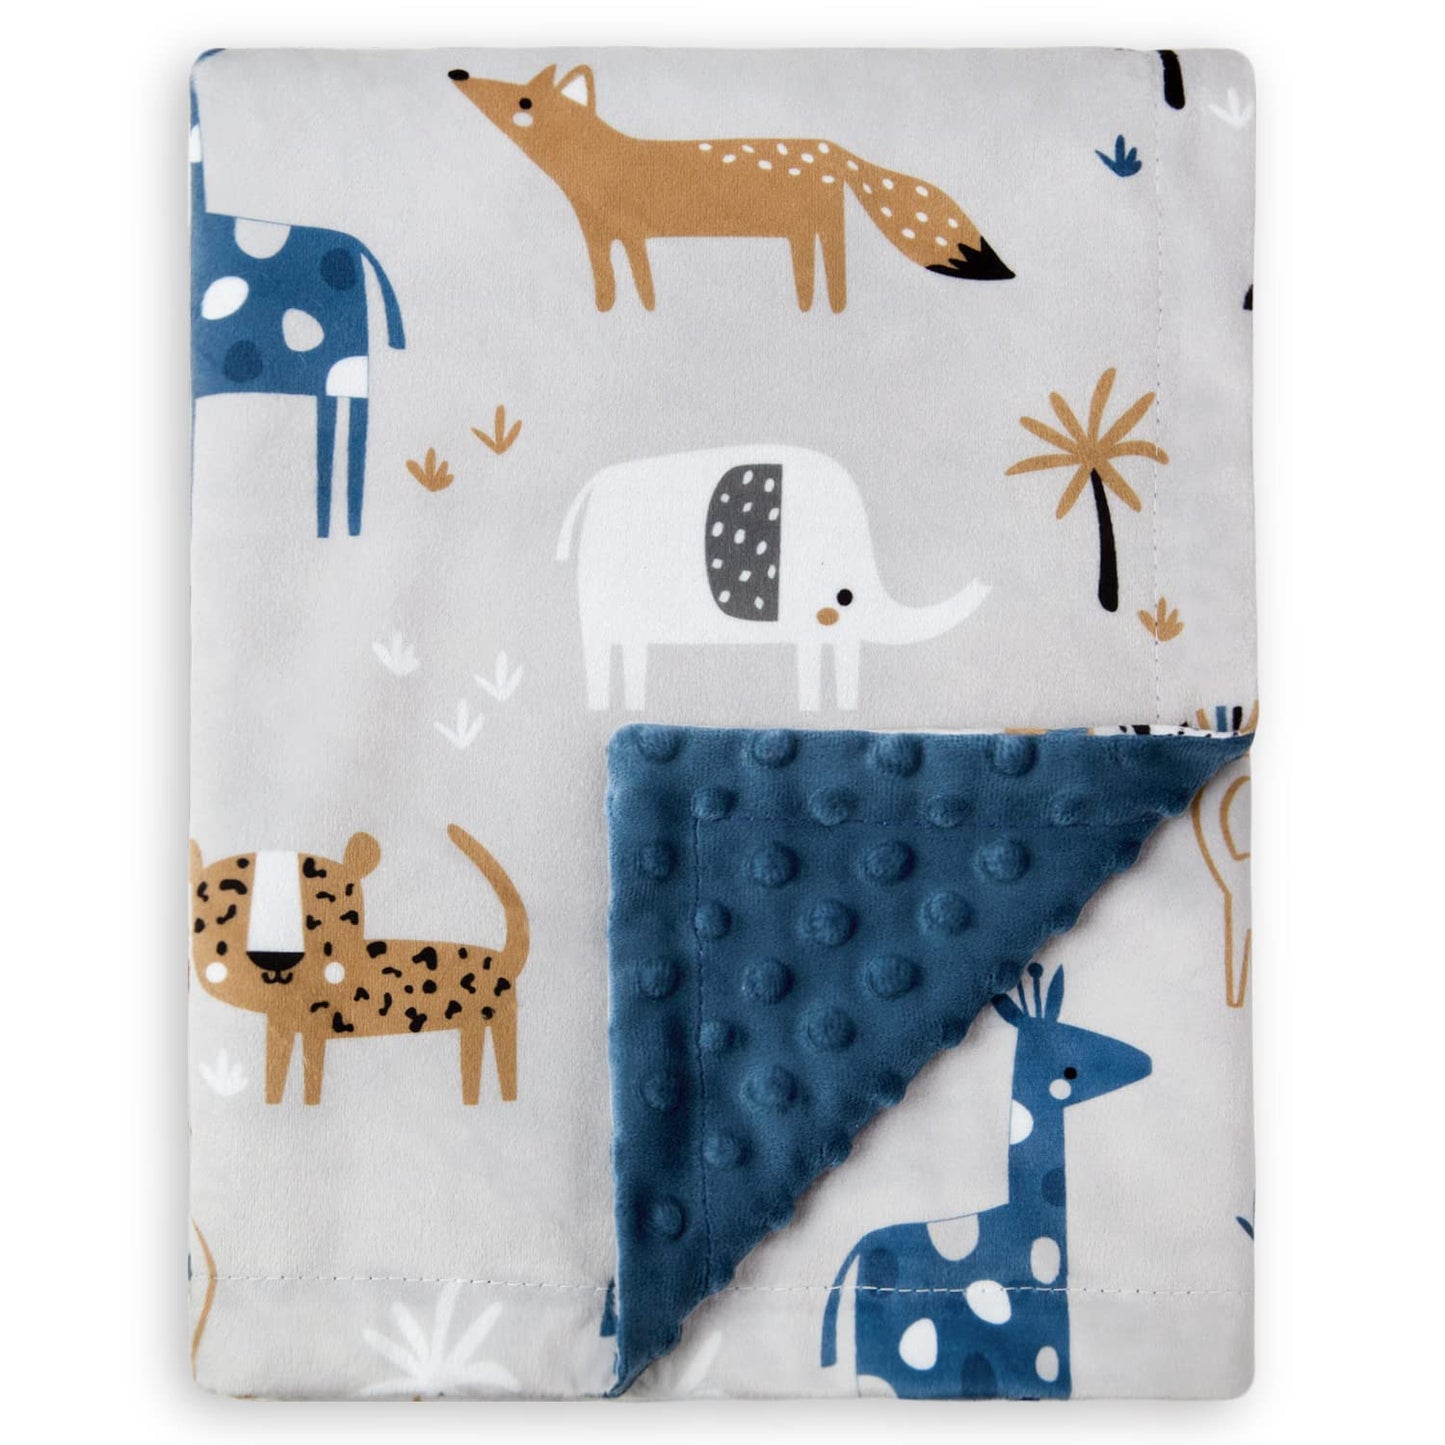 BORITAR Unisex Baby Blanket for Boys Girls Super Soft Minky with Double Layer Dotted Backing, Printed Snow Mountain Animals Nursery Bed Blankets for Stroller Crib Shower Gifts 30 x 40 Inch(75x100cm)